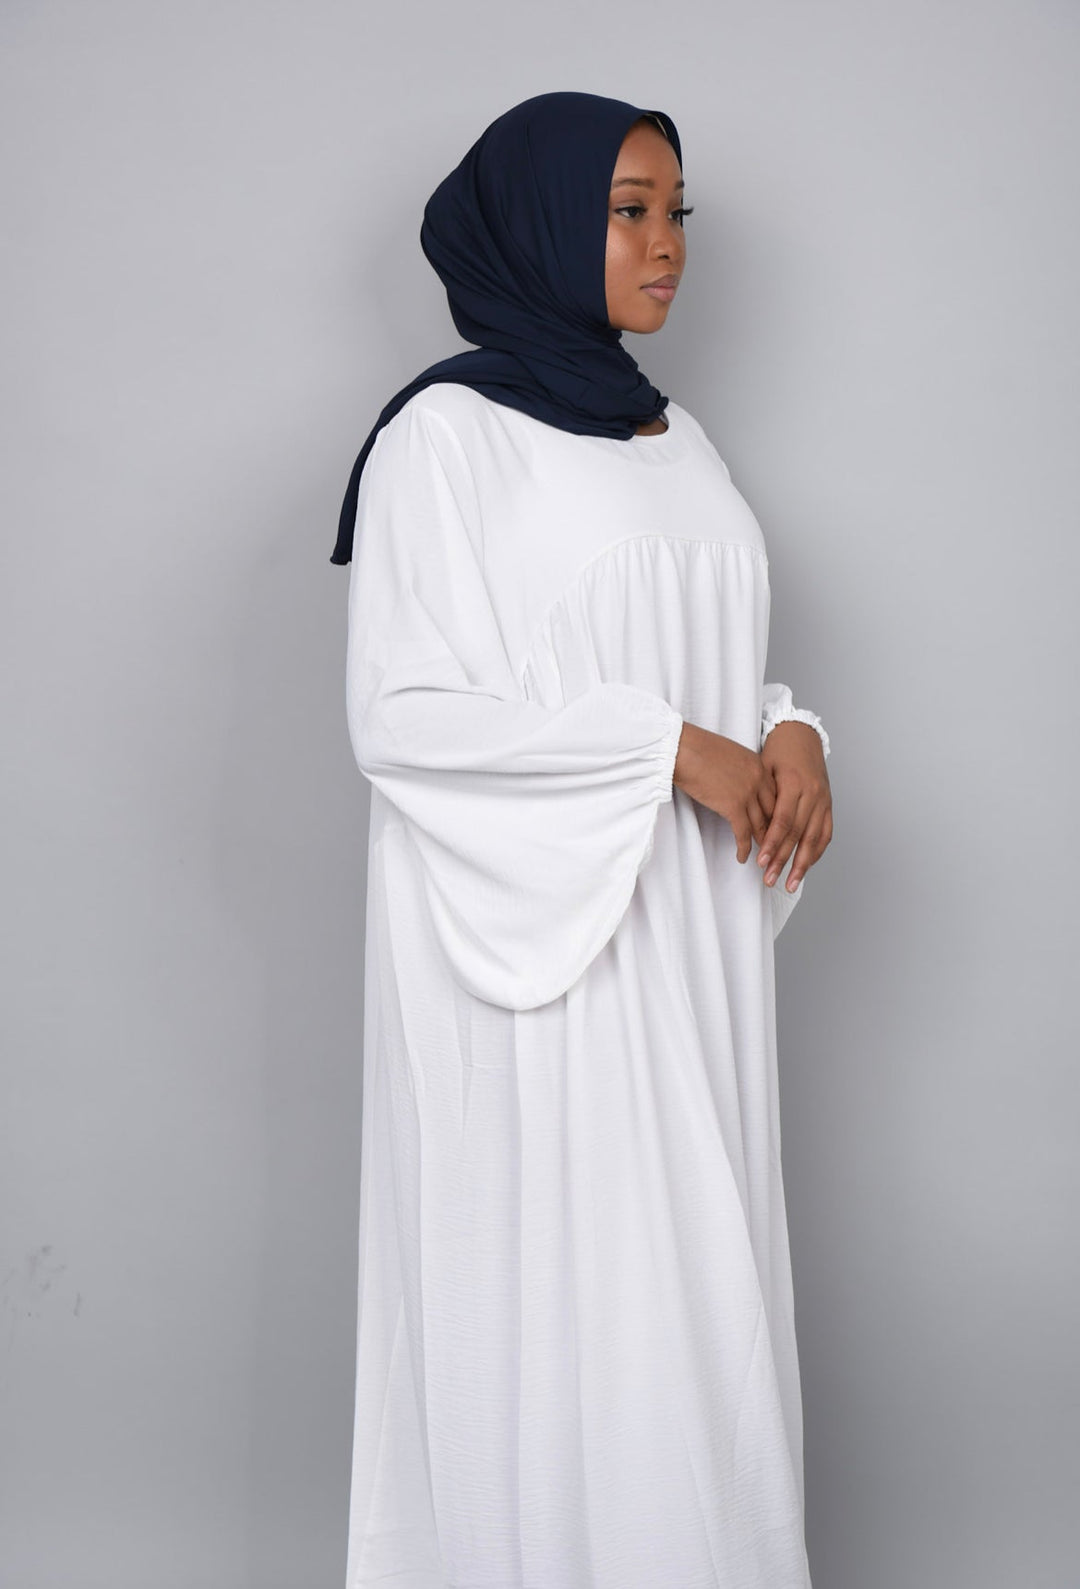 Get trendy with Amelia Textured Abaya - White -  available at Voilee NY. Grab yours for $54.90 today!